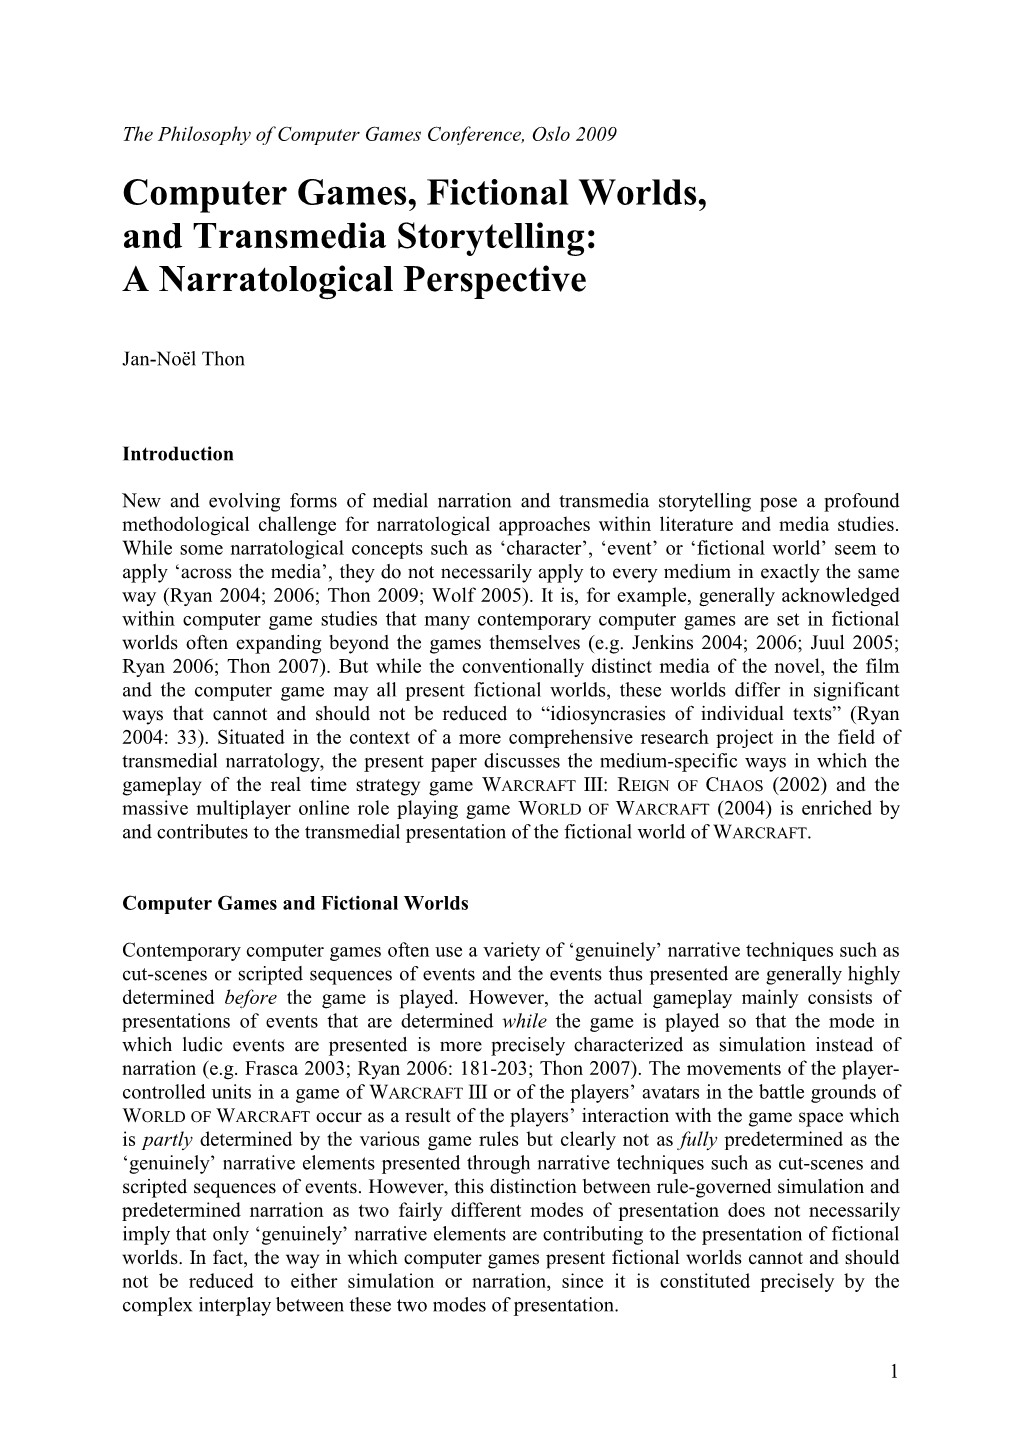 Computer Games, Fictional Worlds, and Transmedia Storytelling: a Narratological Perspective